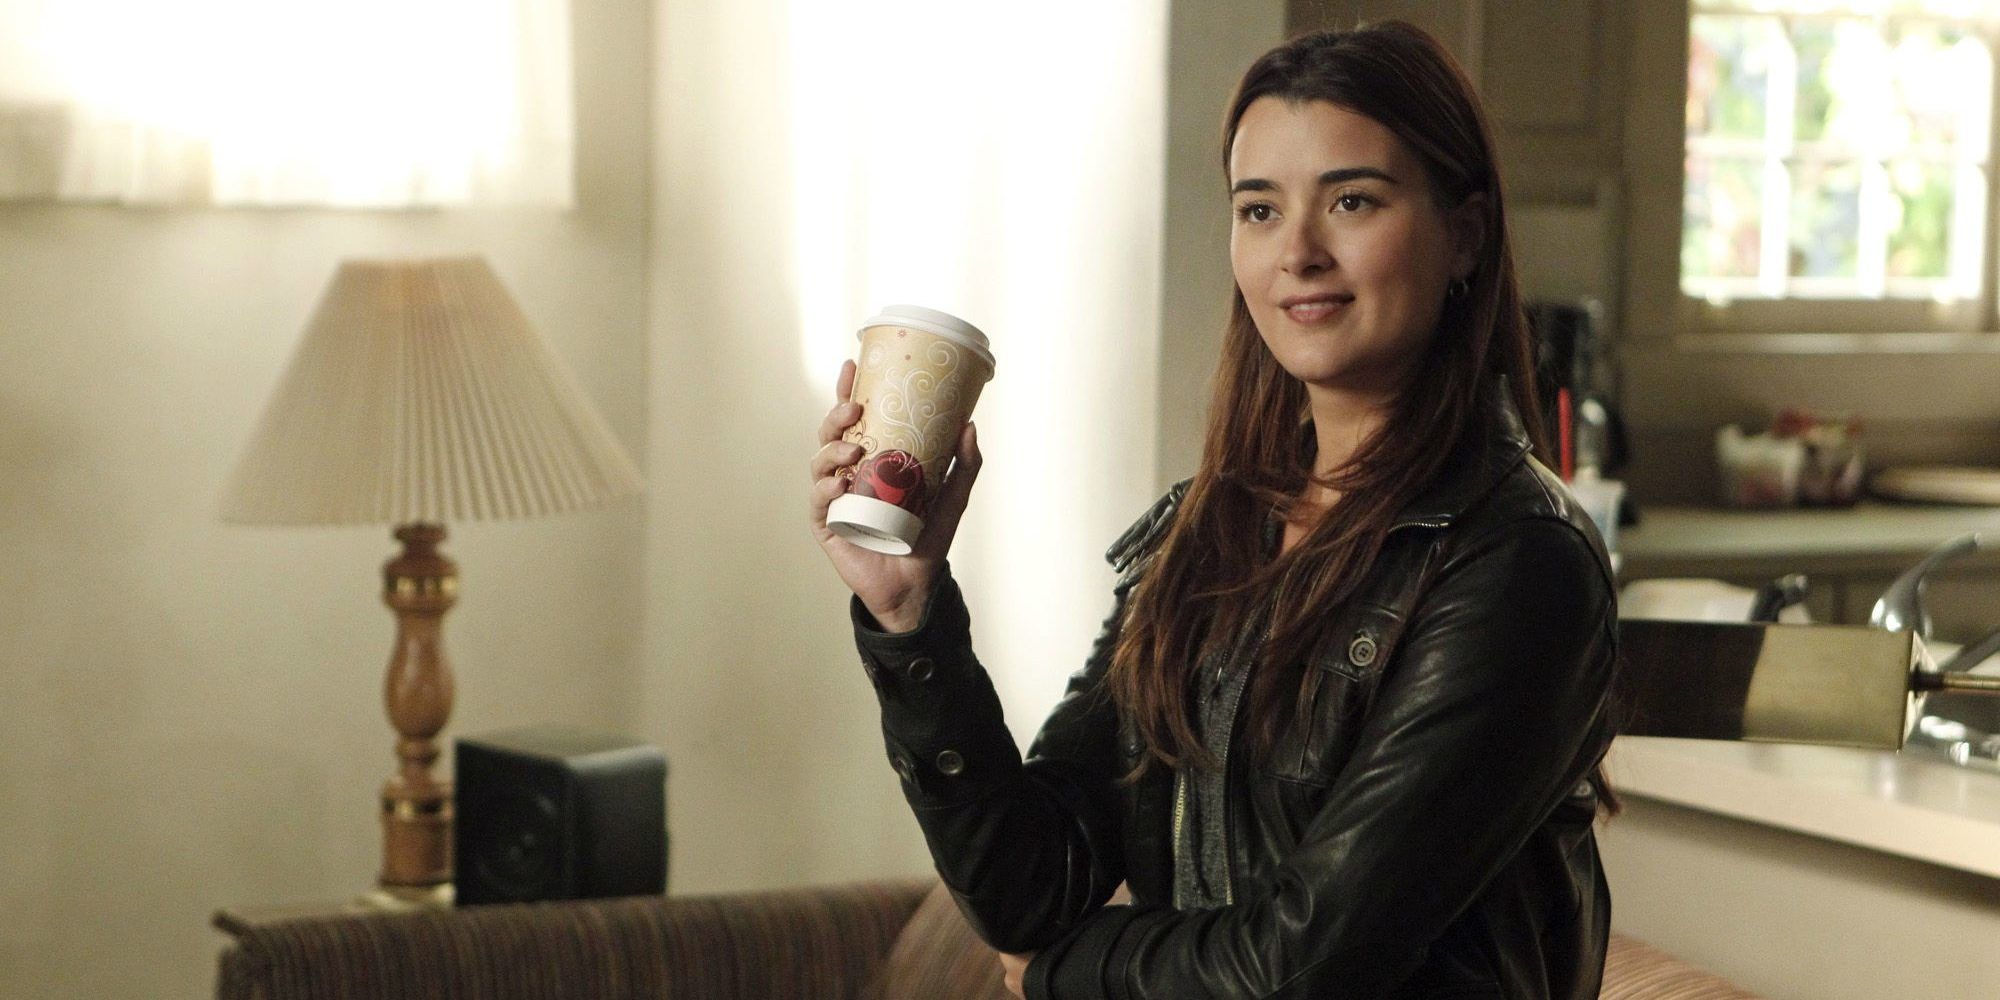 Ziva David grins while holding a coffee cup in NCIS